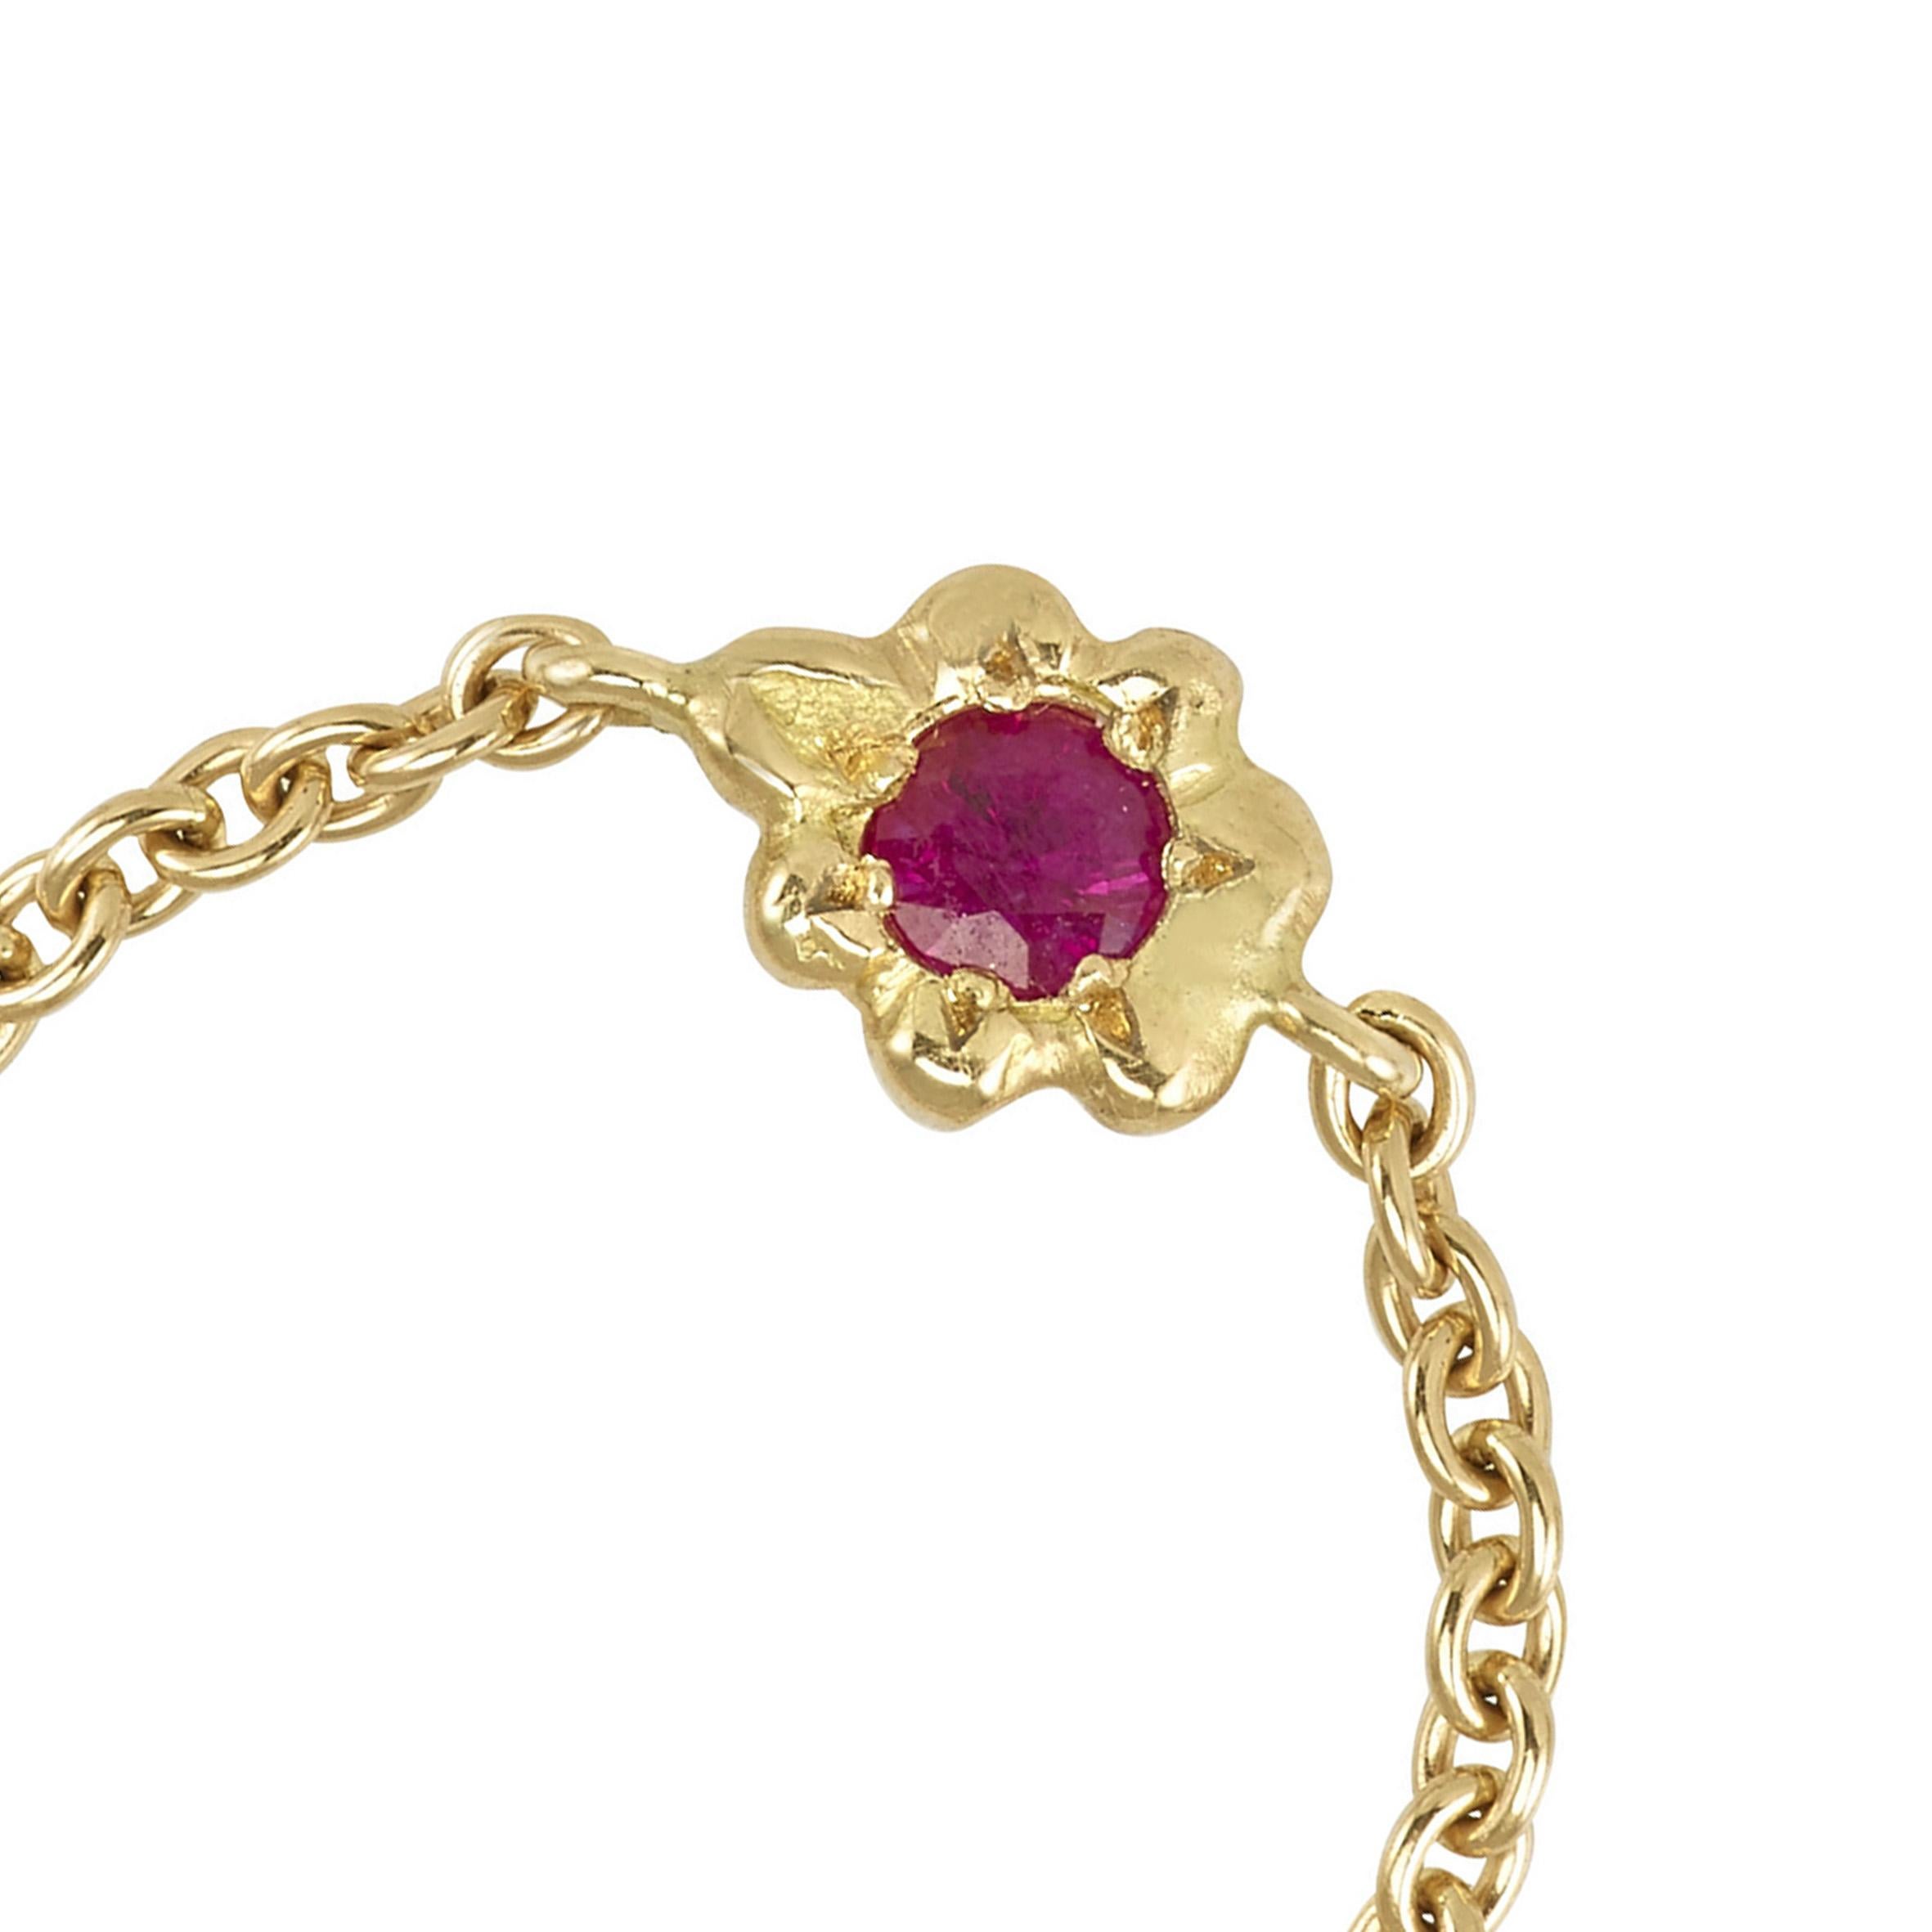 This Anais Rheiner ring is handmade in 18 Karat Yellow Gold. It is set with a ruby, approximately 0.3 carats. The ring band is a chain that is moveable in order for it to position itself nicely on the finger for real comfort. Its weight is 1 gram